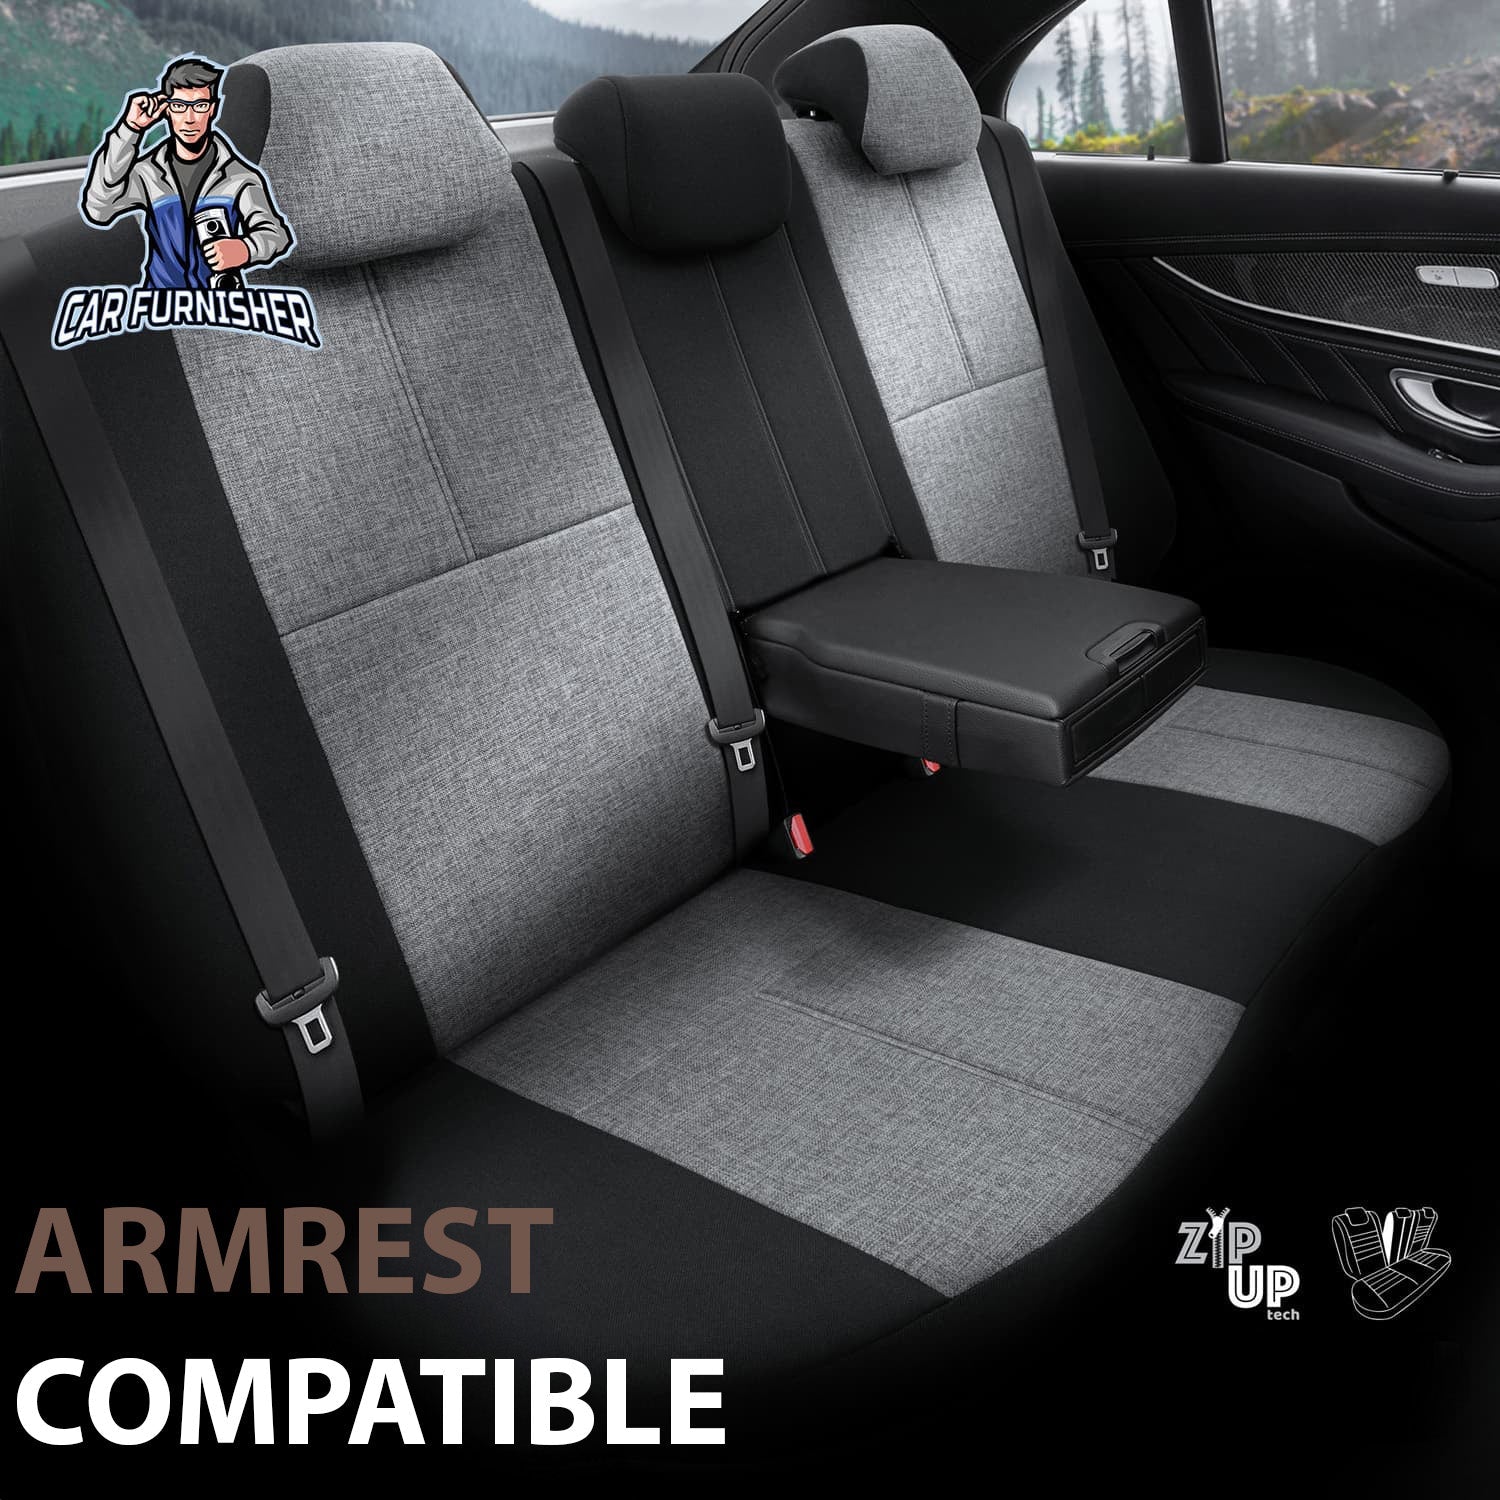 Mercedes 190 Seat Covers Voyager Design Gray 5 Seats + Headrests (Full Set) Leather & Linen Fabric